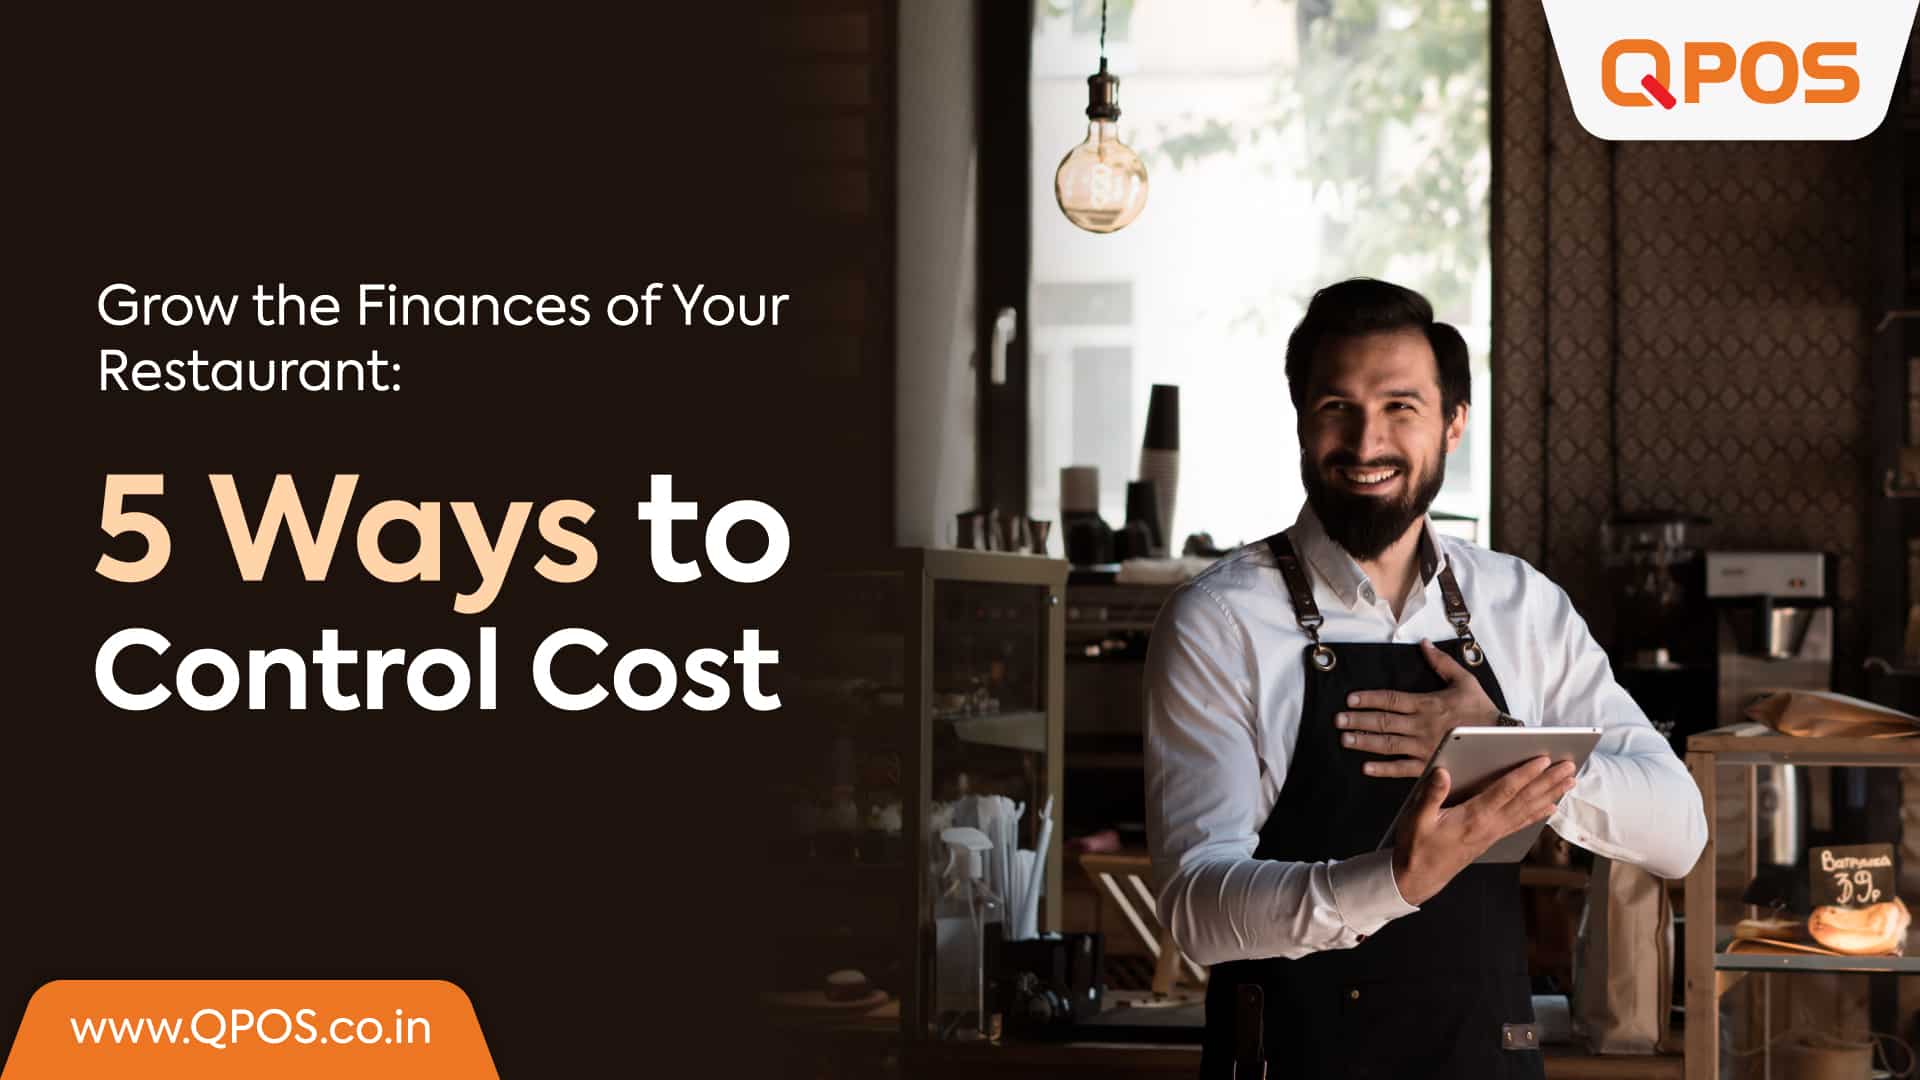 5 Ways to Control Cost